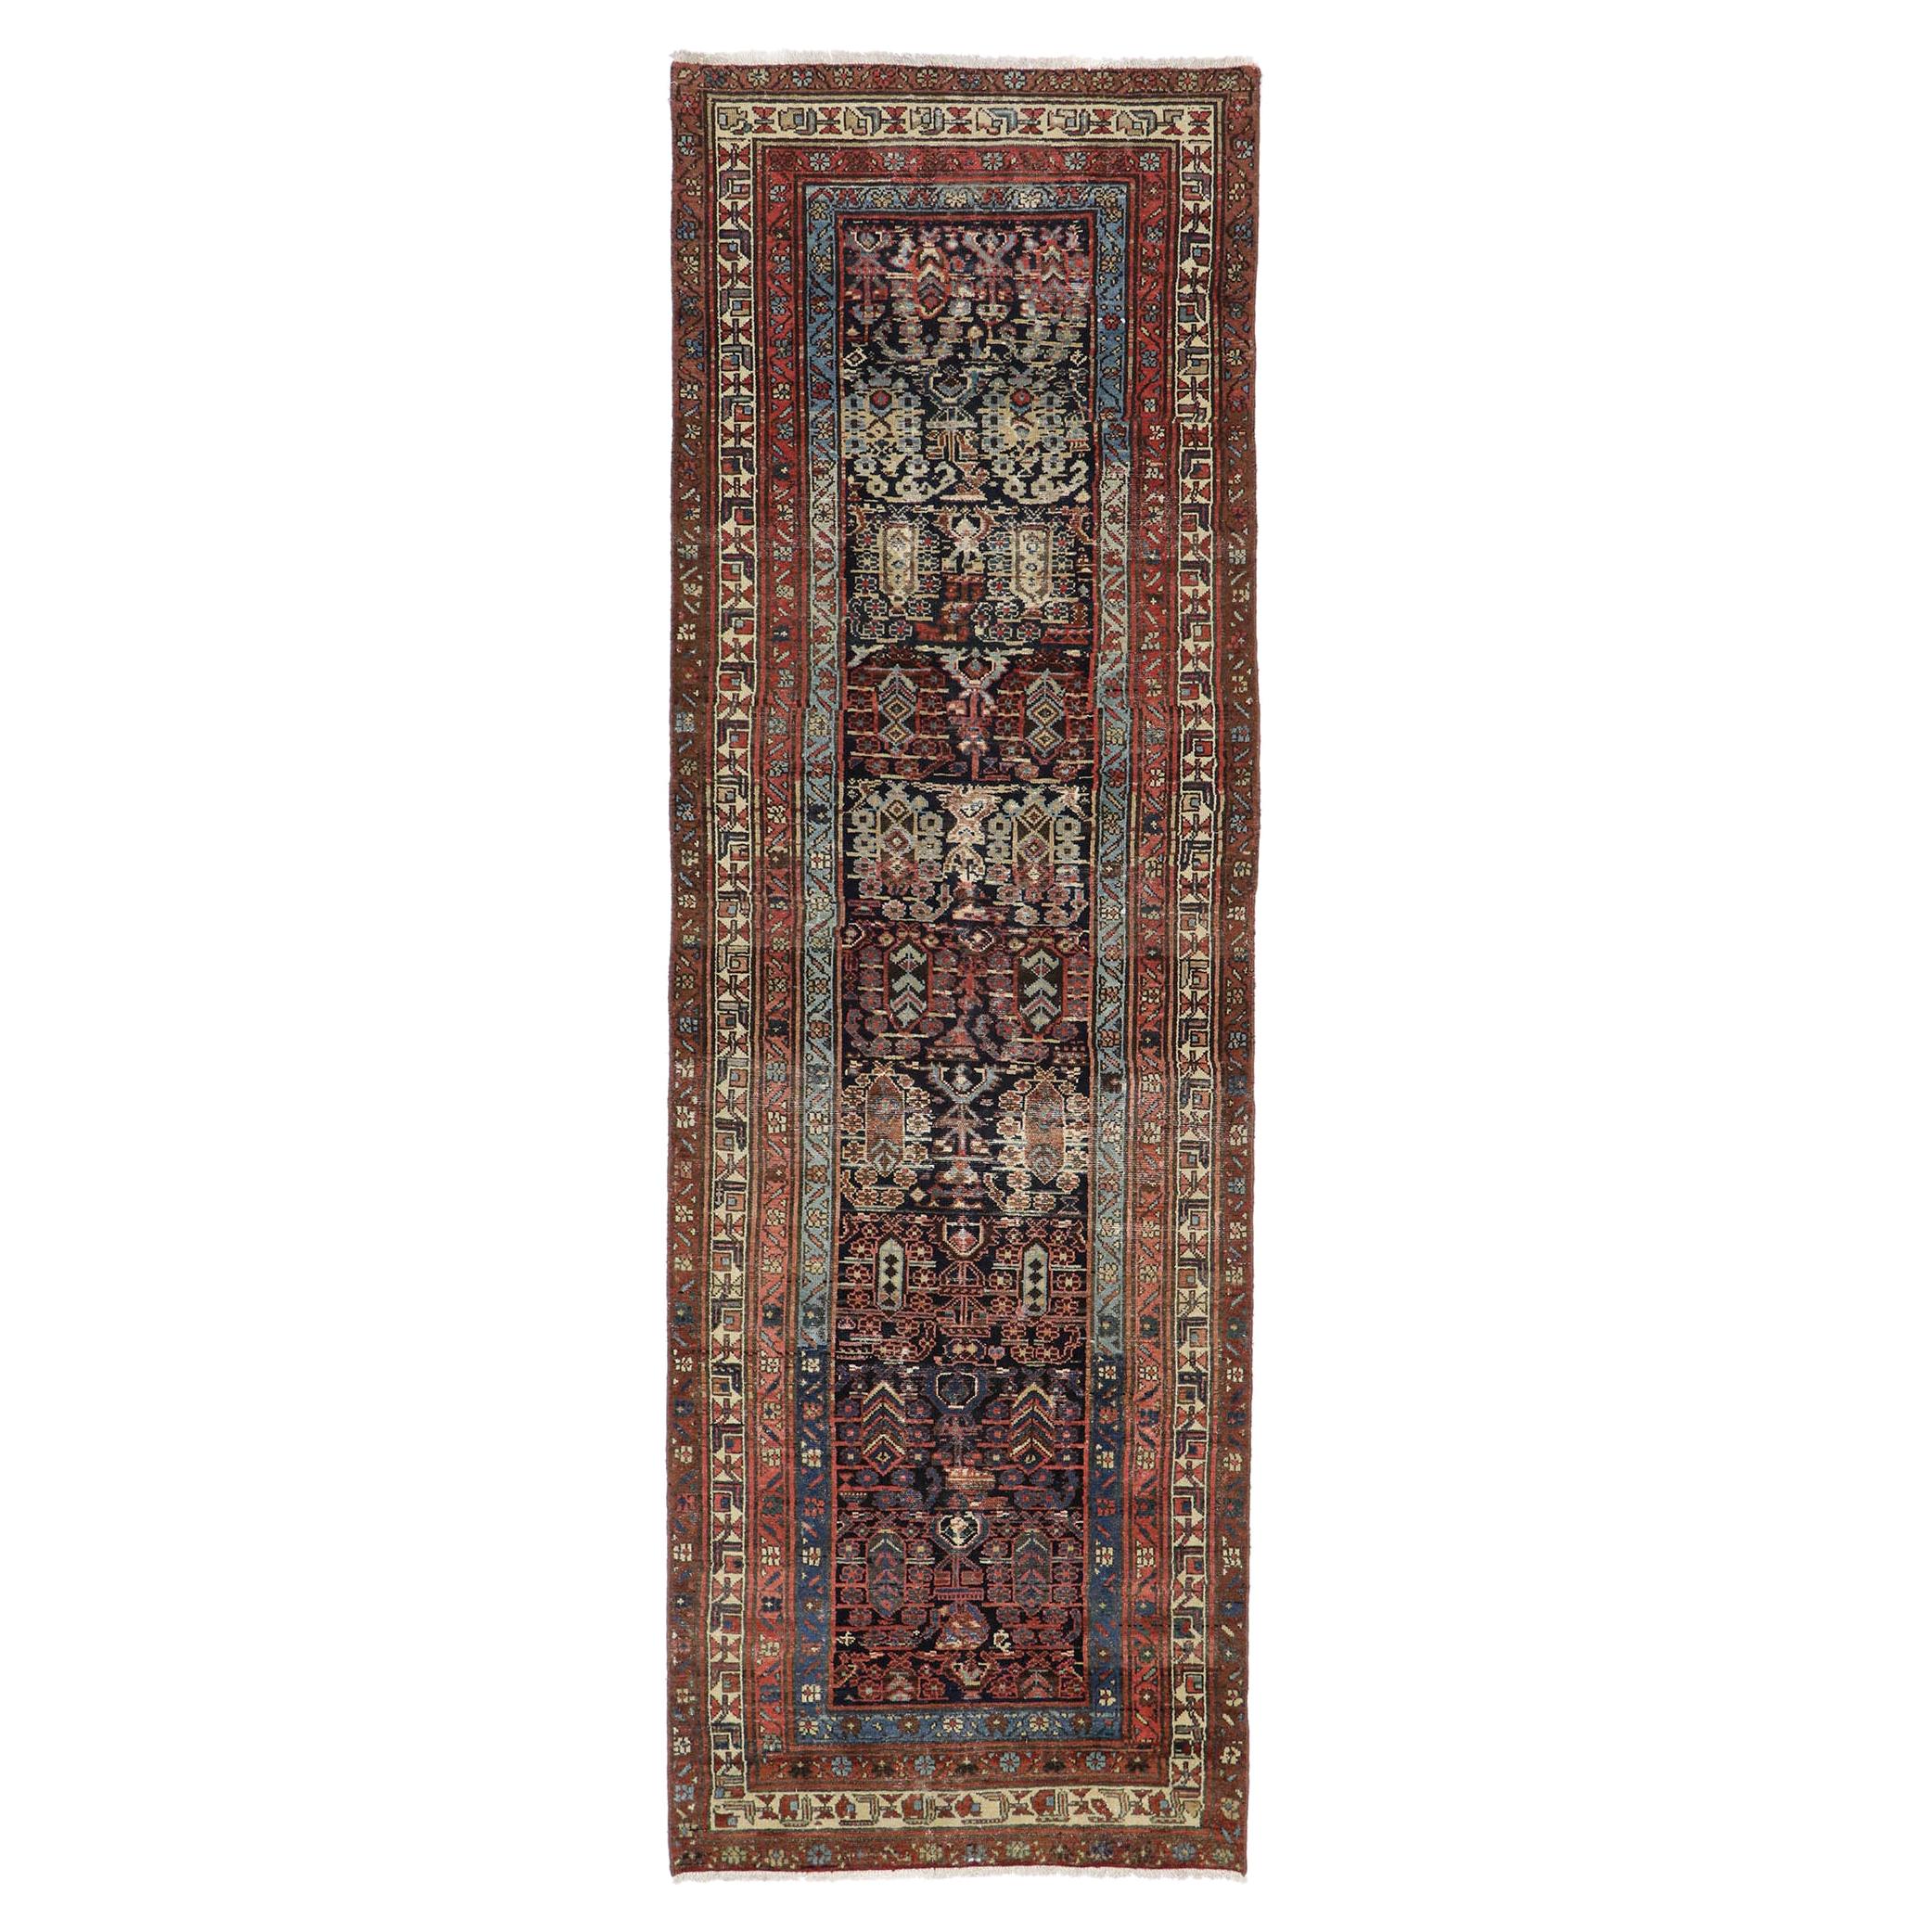 Antique Persian Malayer Runner with Rustic Mid-Century Modern Style